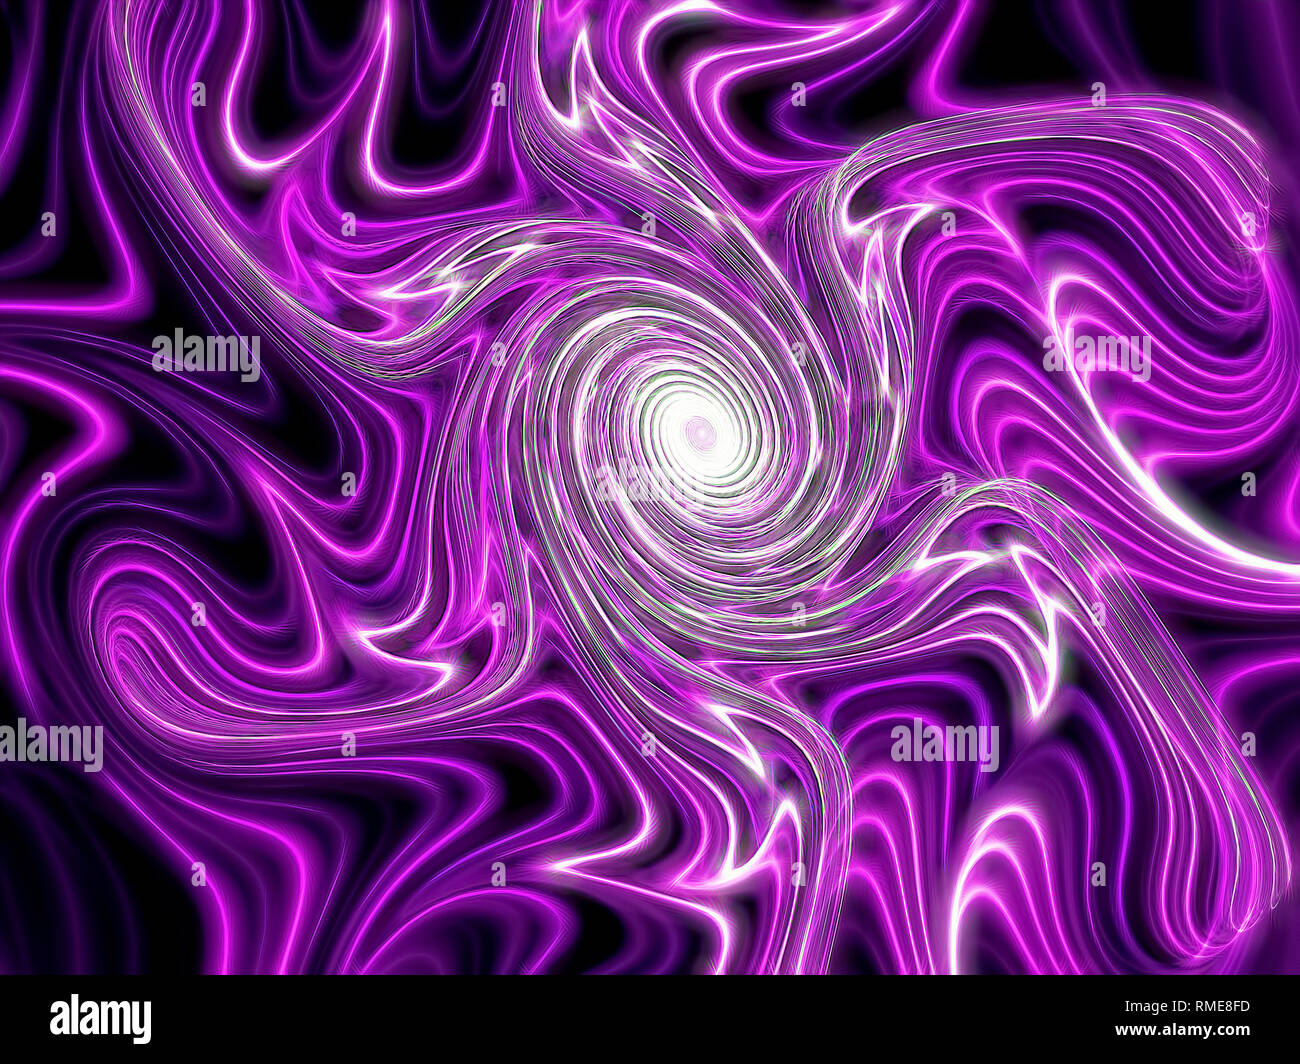 Neon glowing fractal spiral - digitally generated image Stock Photo